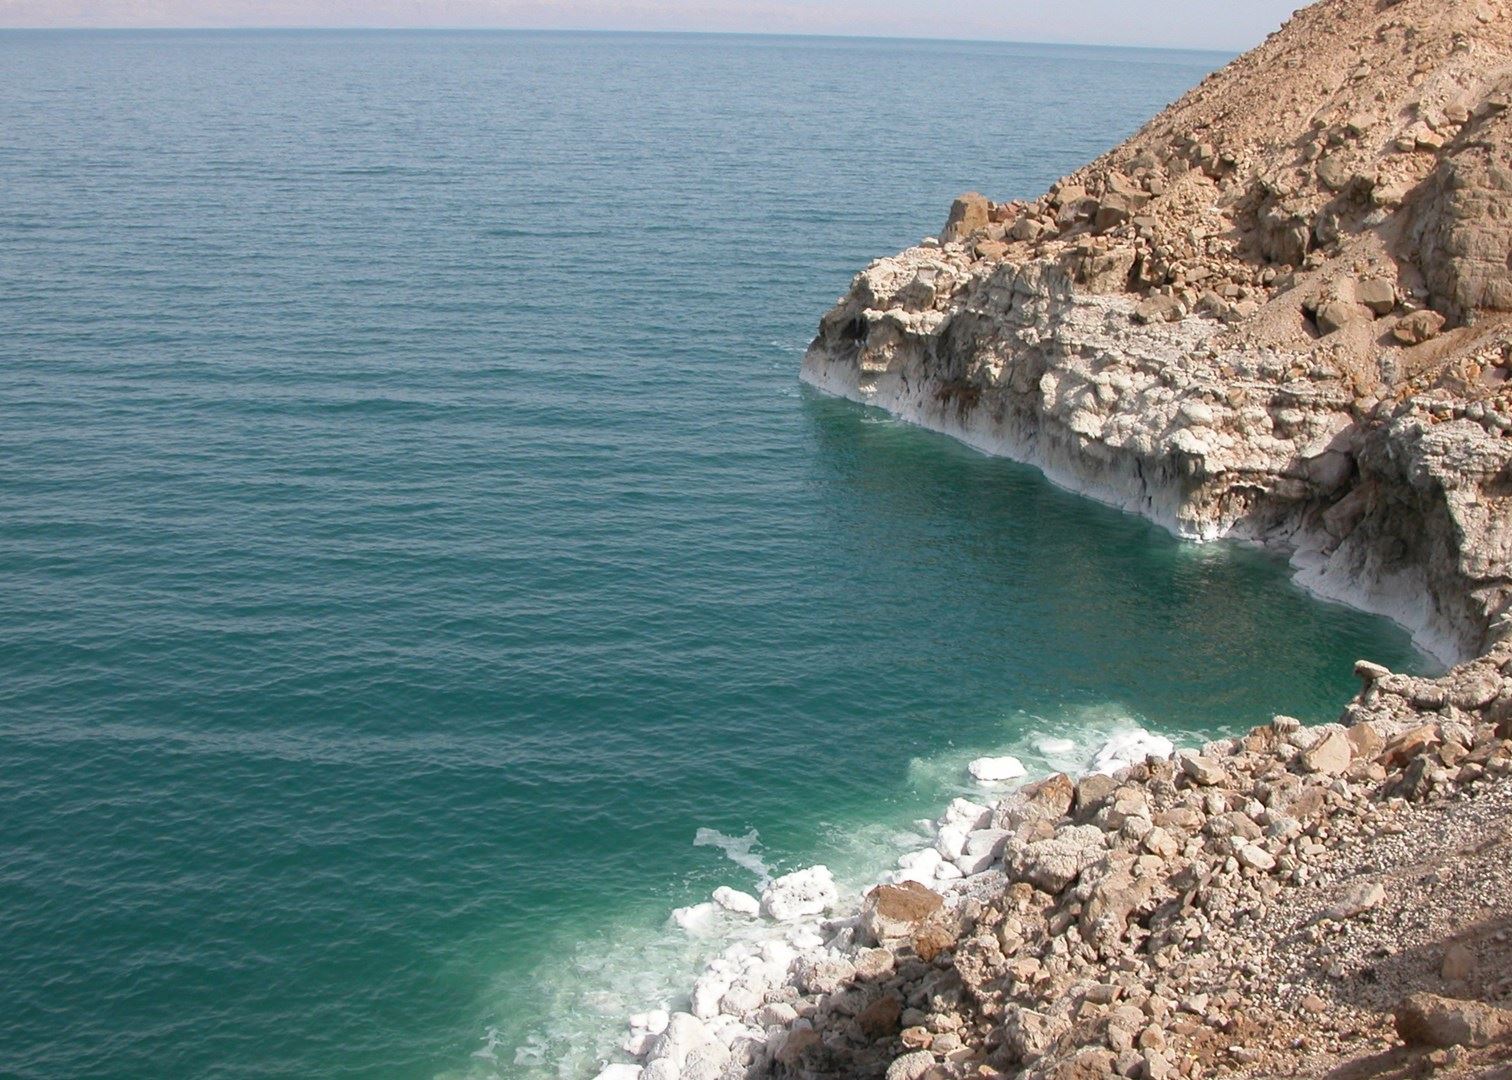 Visit The Dead Sea on a trip to Jordan | Audley Travel